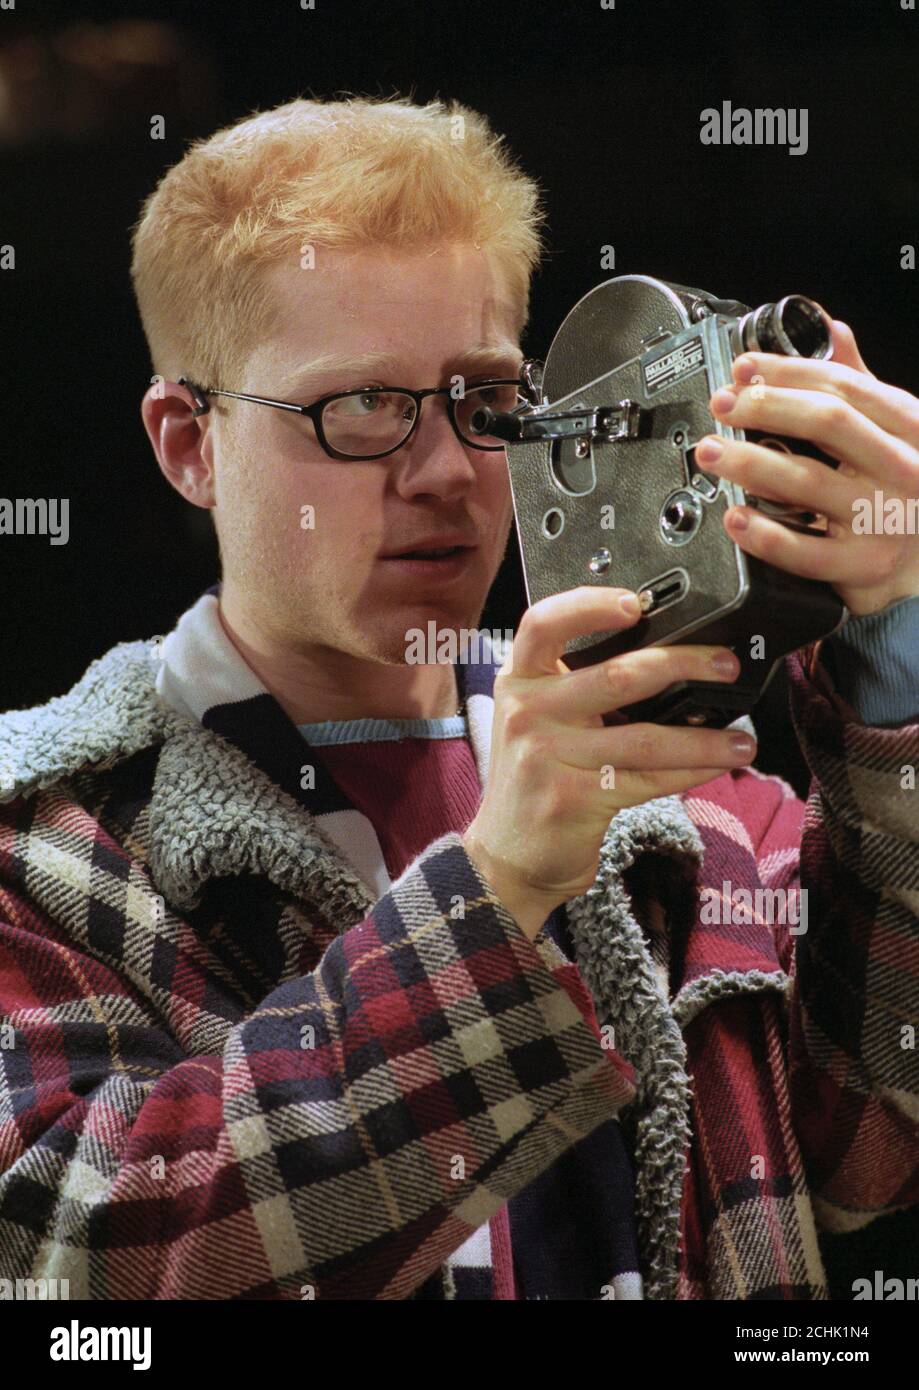 Actor Anthony Rapp recreates his role as Mark Cohen in the smash hit Broadway musical 'Rent', opening at the Shaftesbury Theatre in London on 12 May. Stock Photo